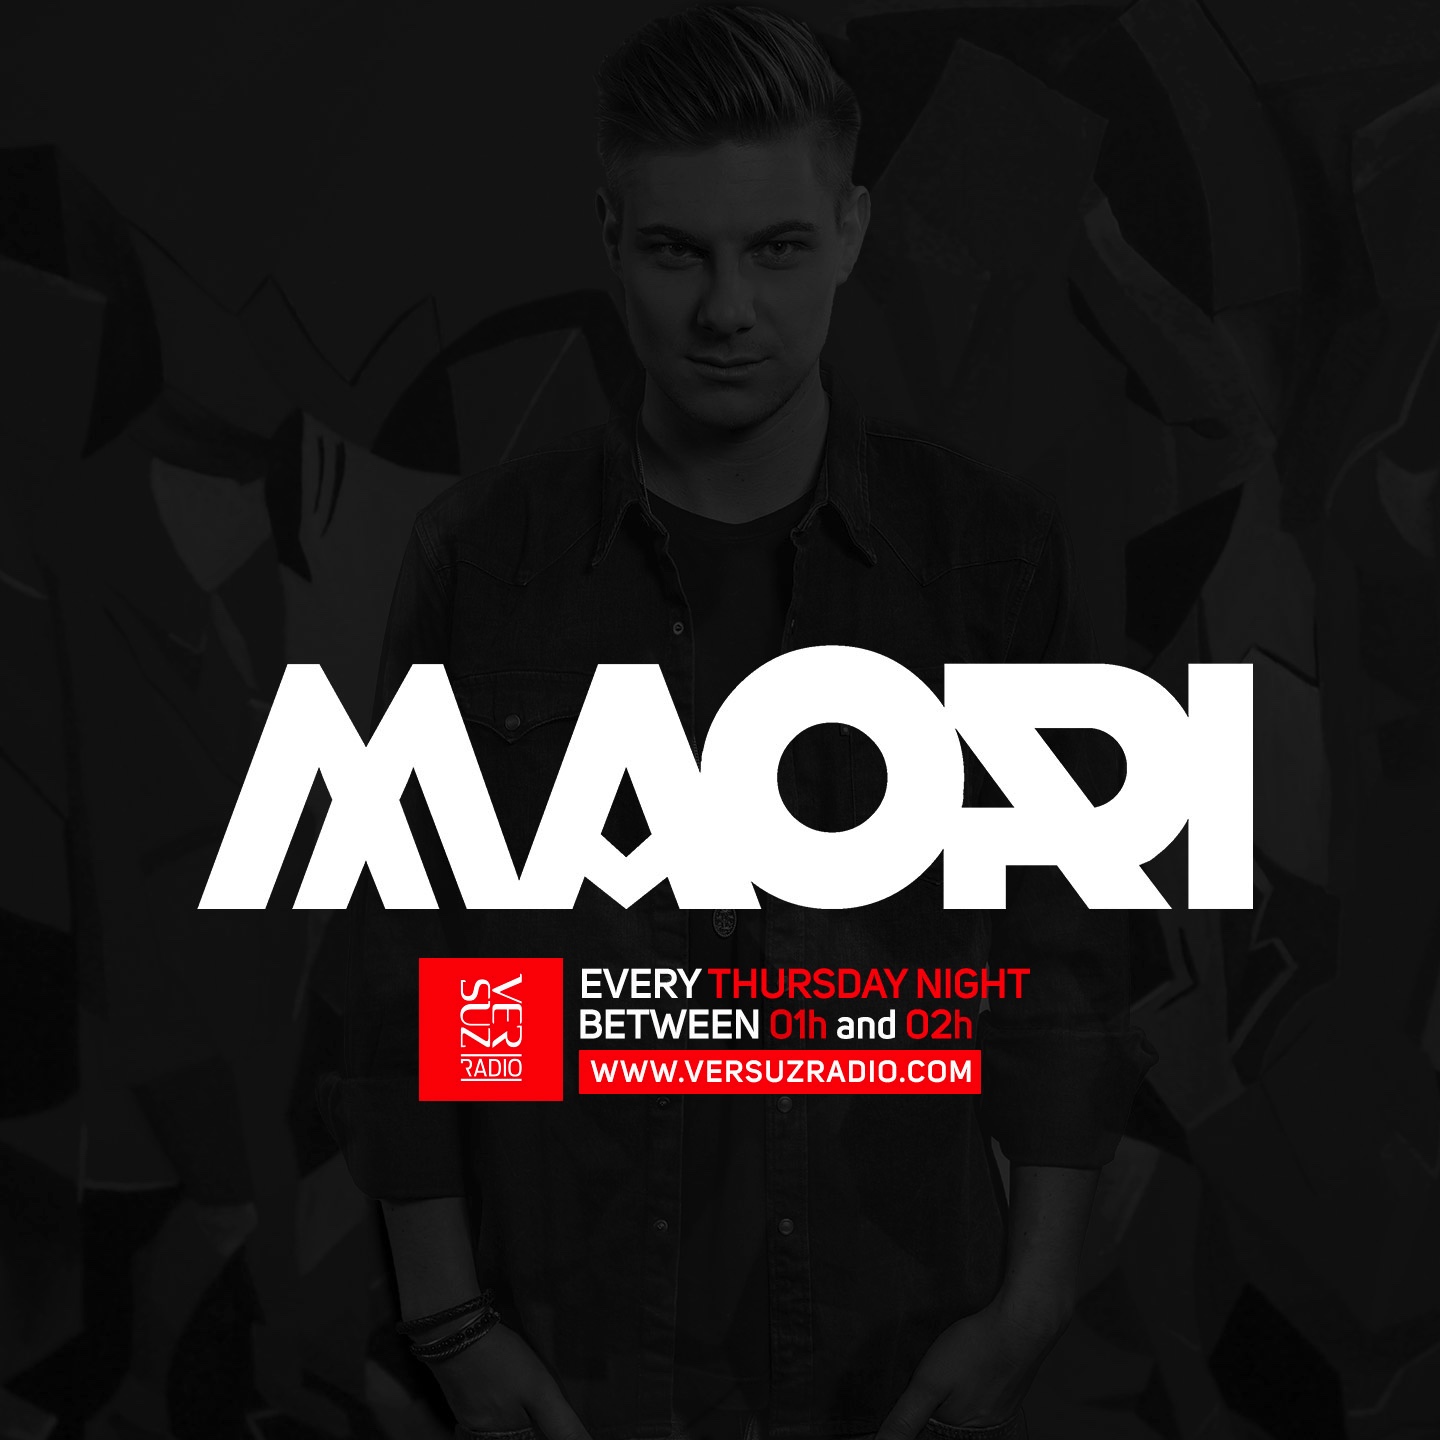 Clubhouse Radio by Maori - Episode #006